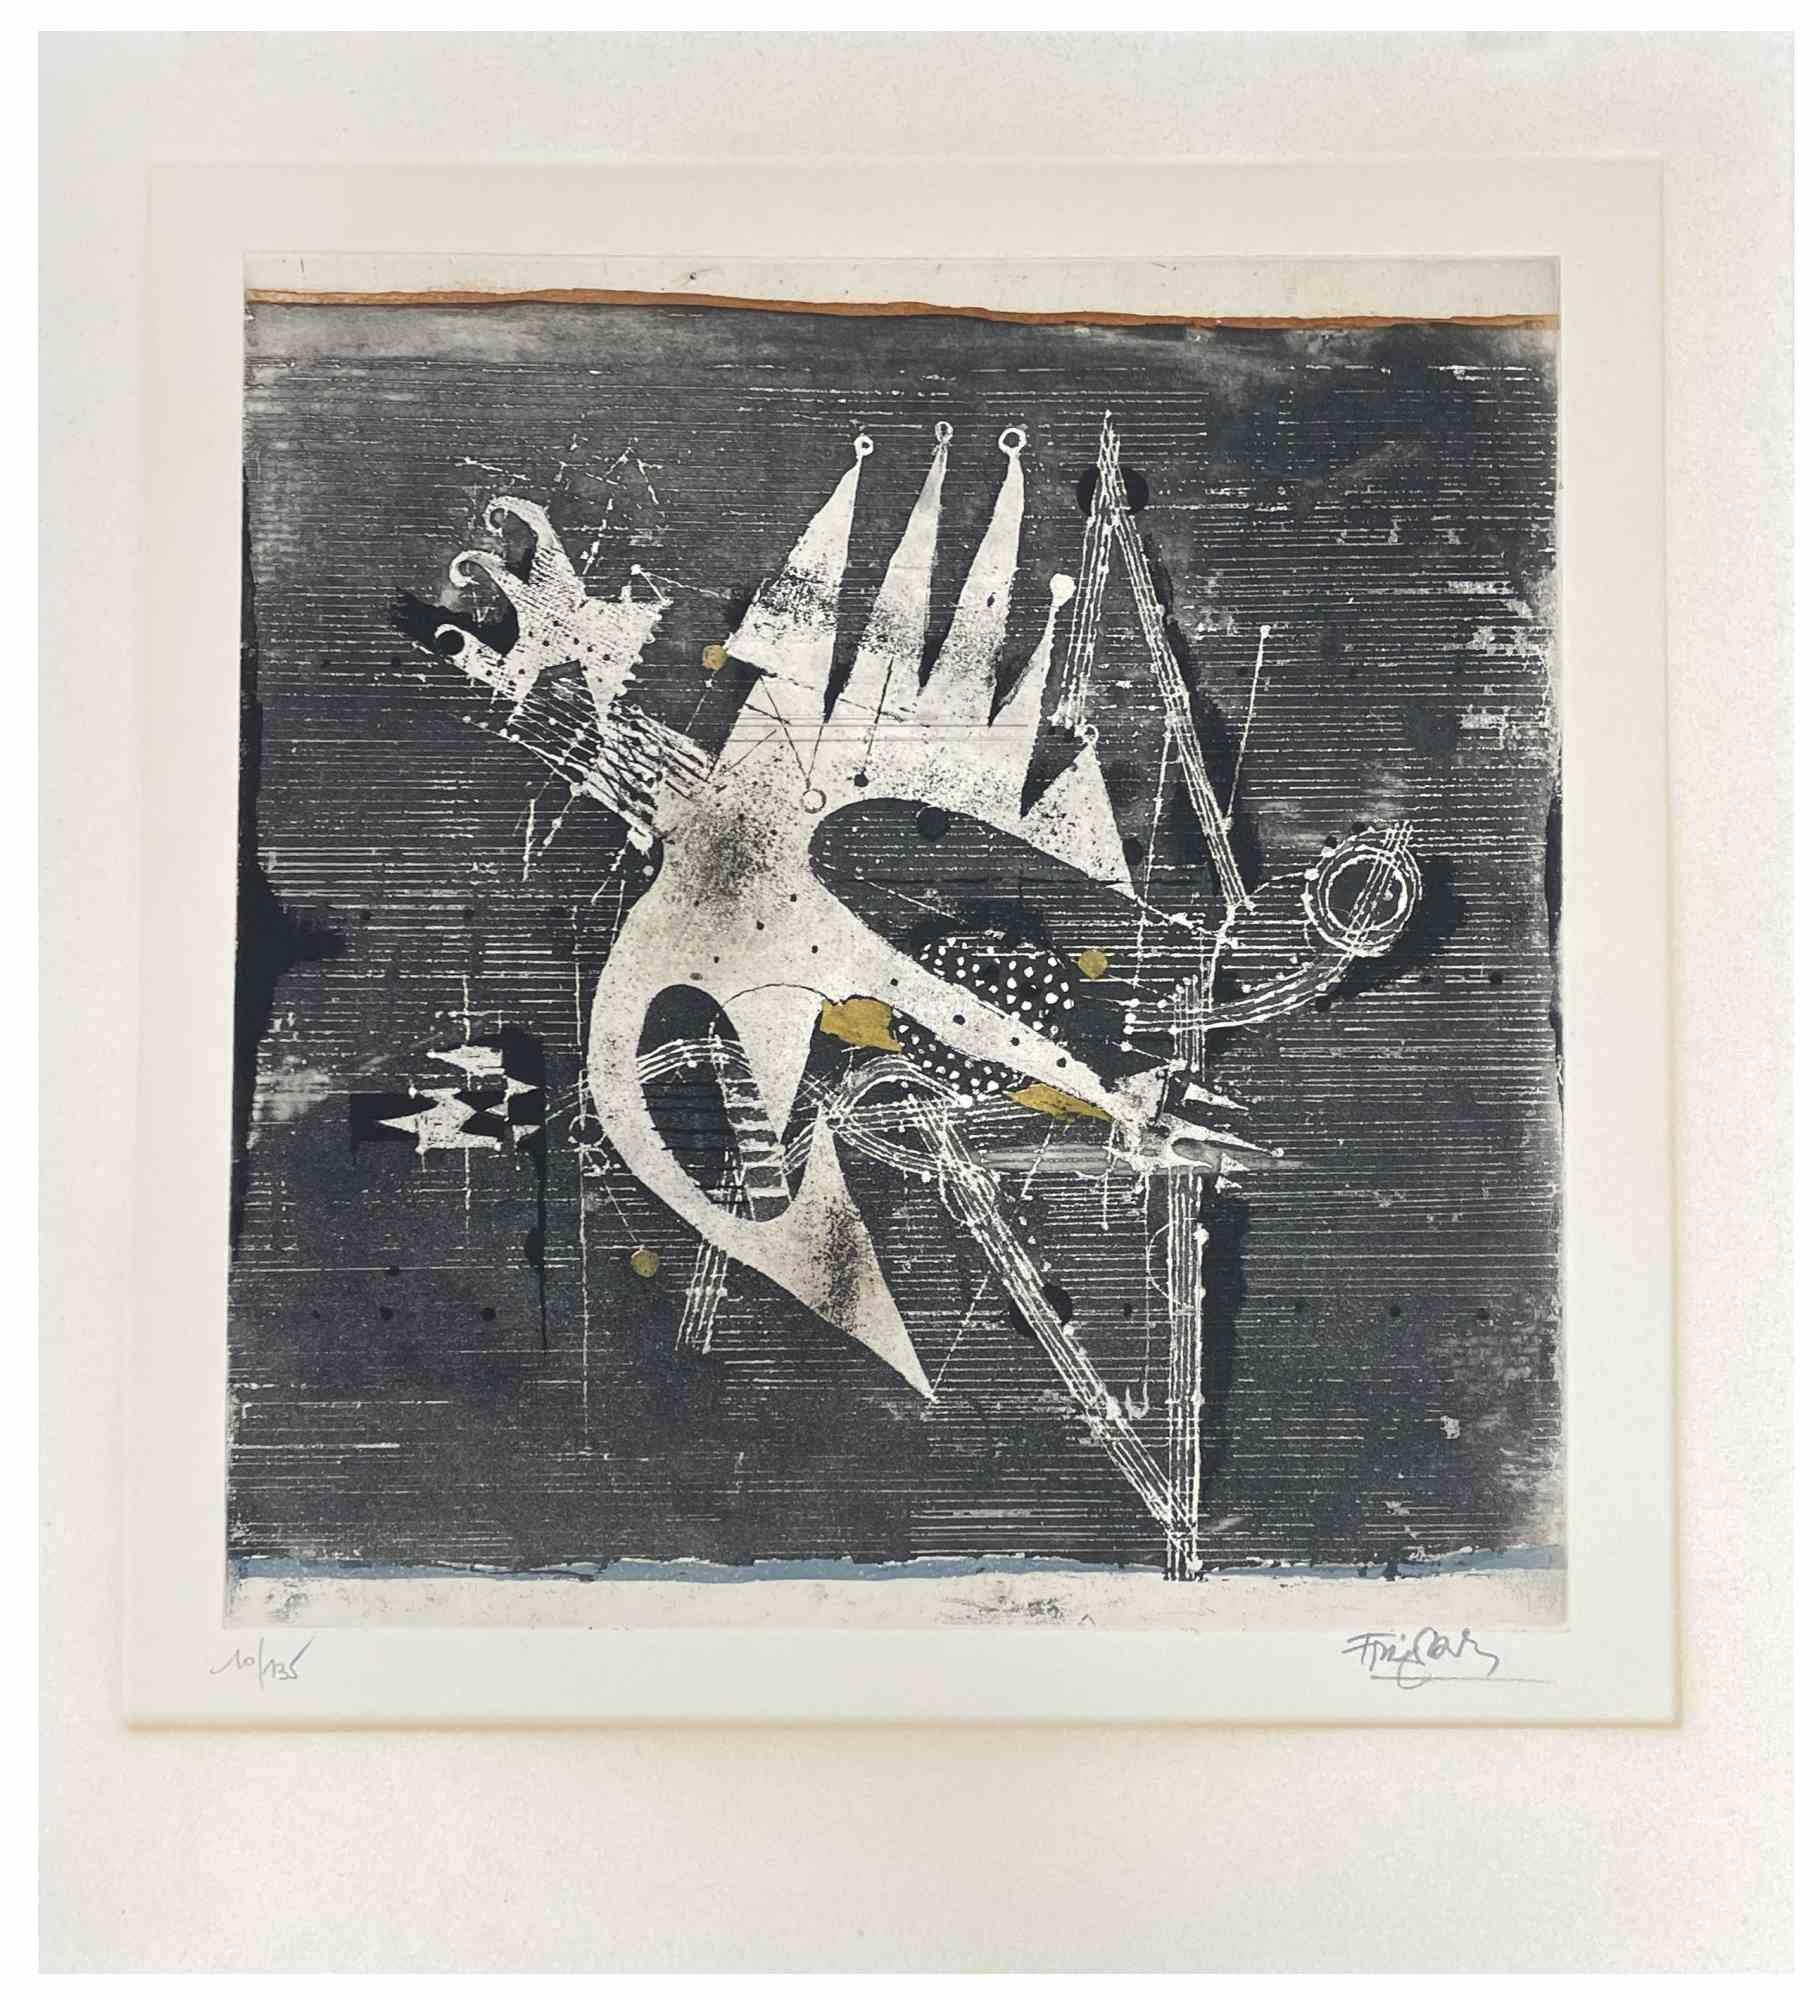 Johnny Friedlaenderin Abstract Print - Untitled - Etching by Johnny Friedlaender - 1970s